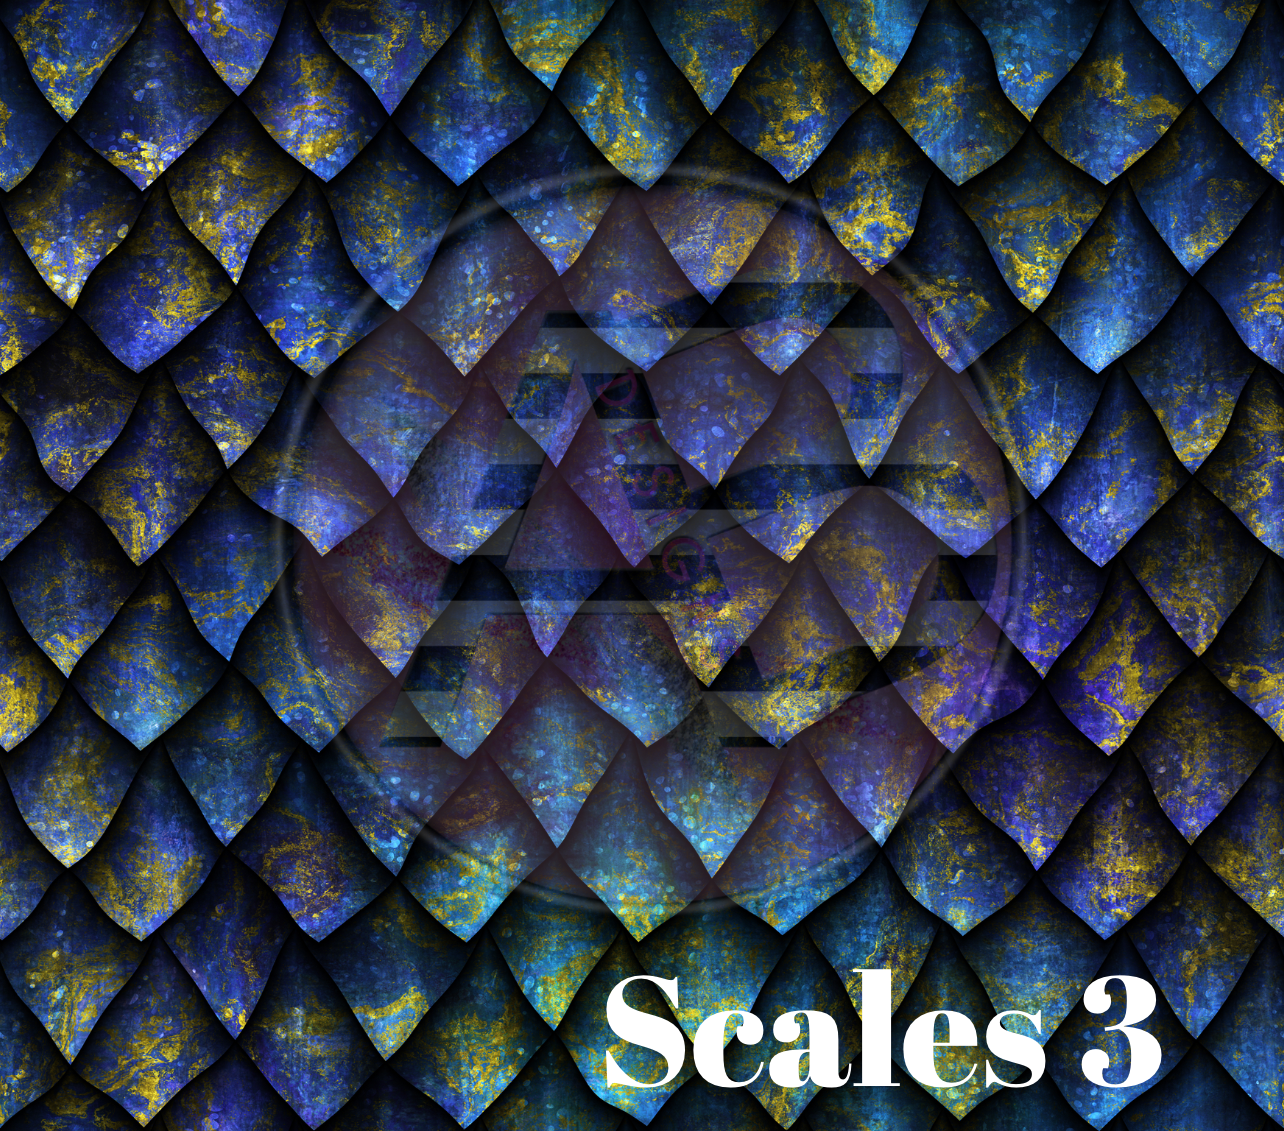 Adhesive Patterned Vinyl - Scales 3